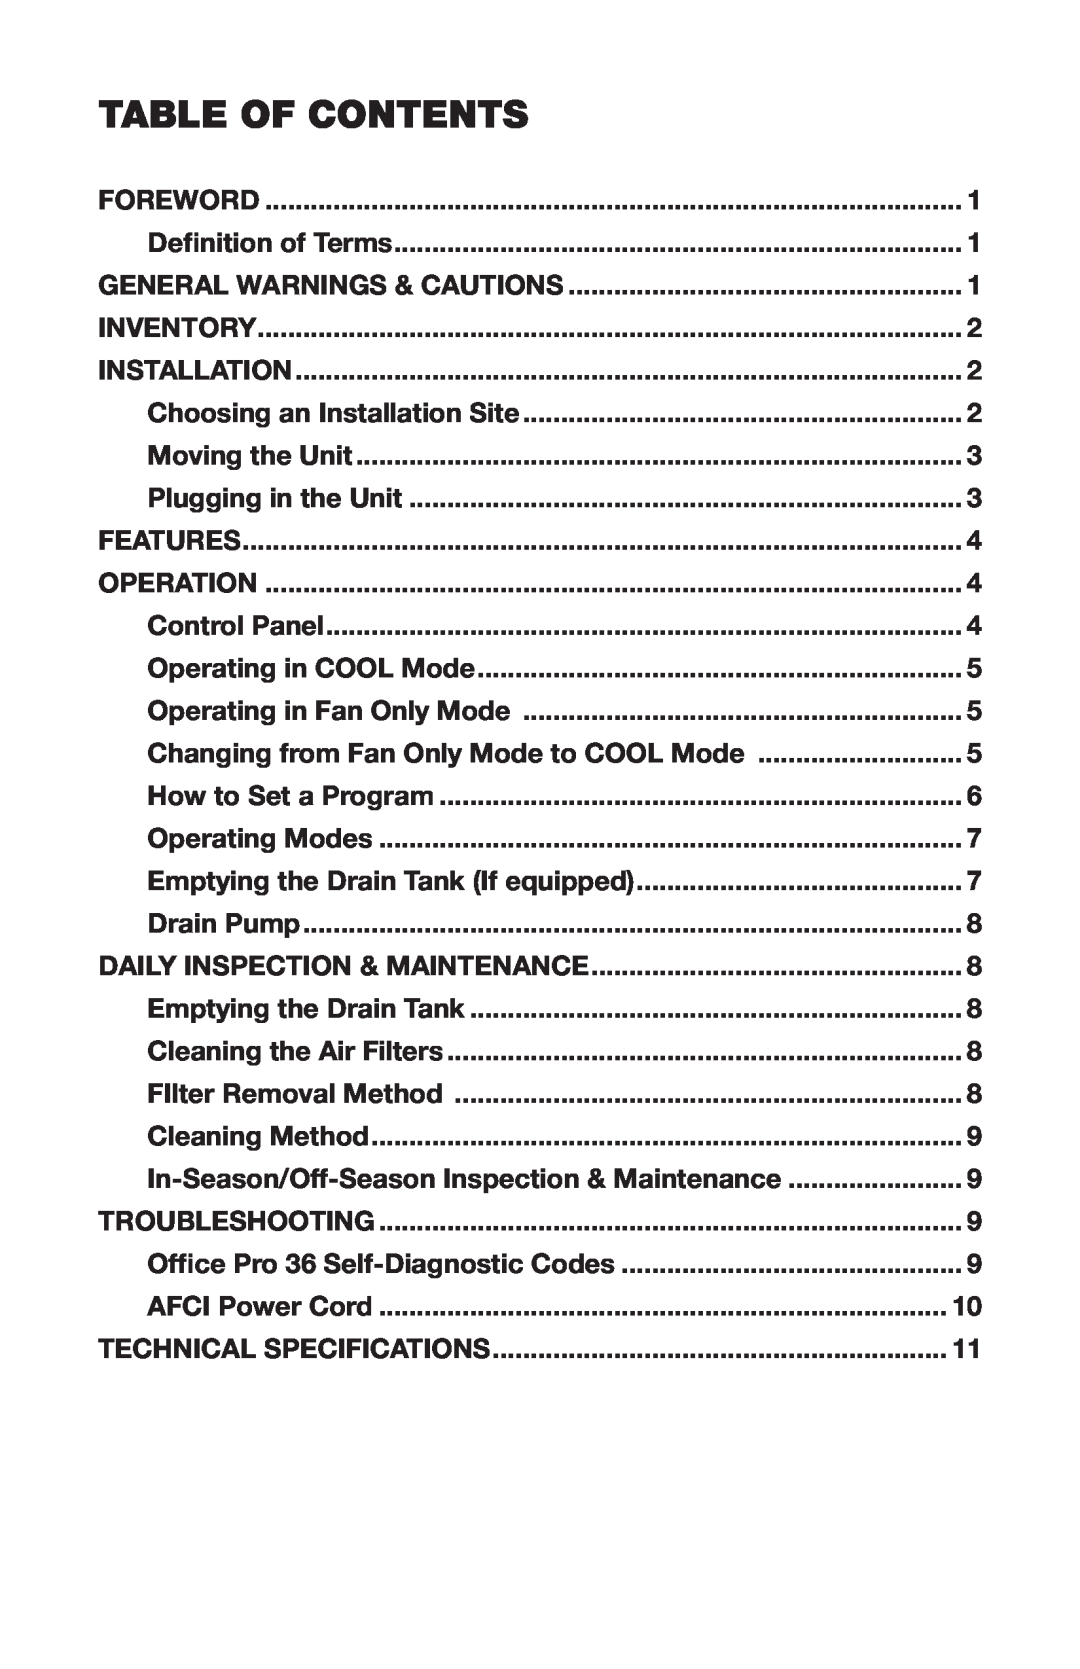 Denso OFFICE PRO 36 operation manual Table Of Contents 